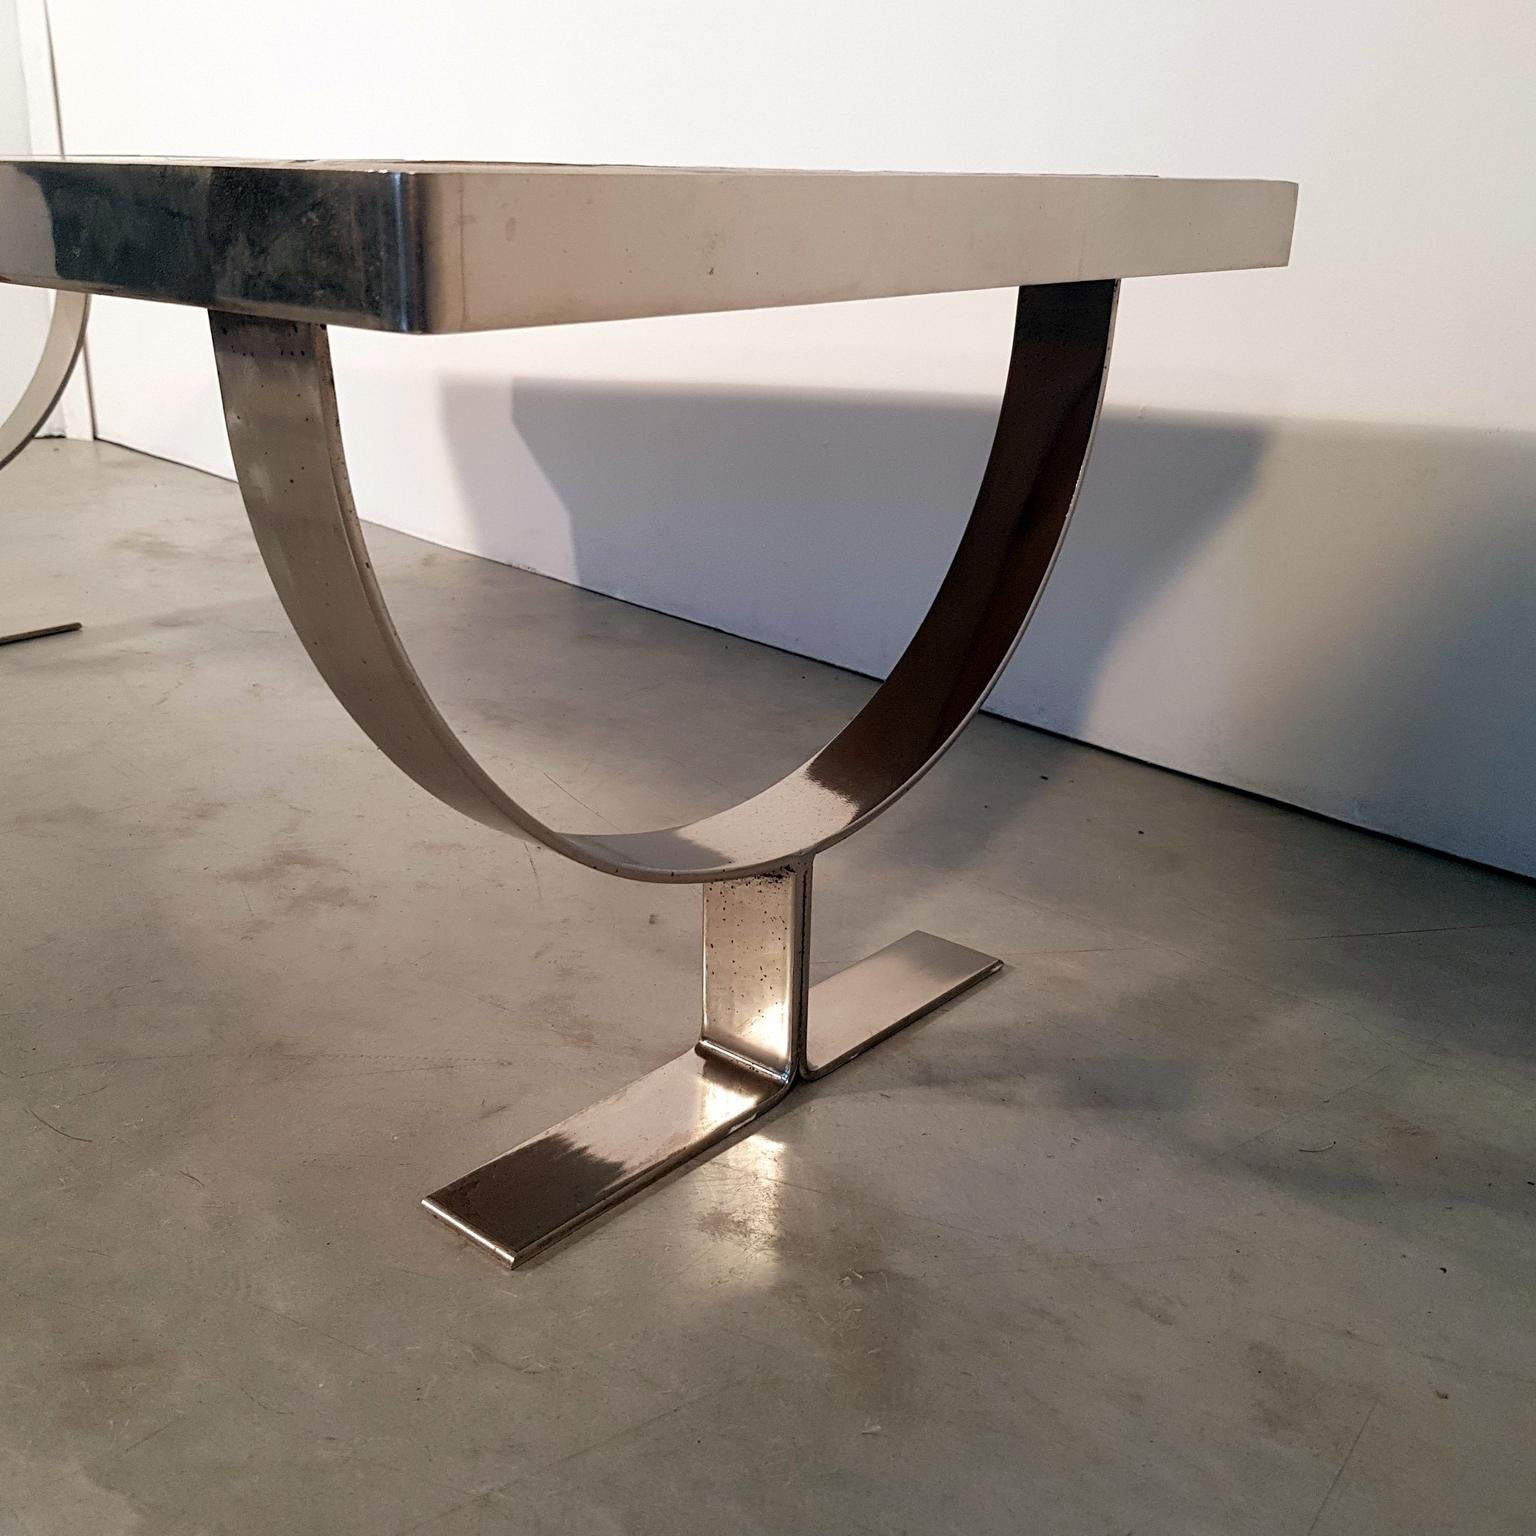 Ceramic-Top Midcentury Coffee Table with Chrome Legs, France, 1970s In Good Condition For Sale In Budapest, Budapest